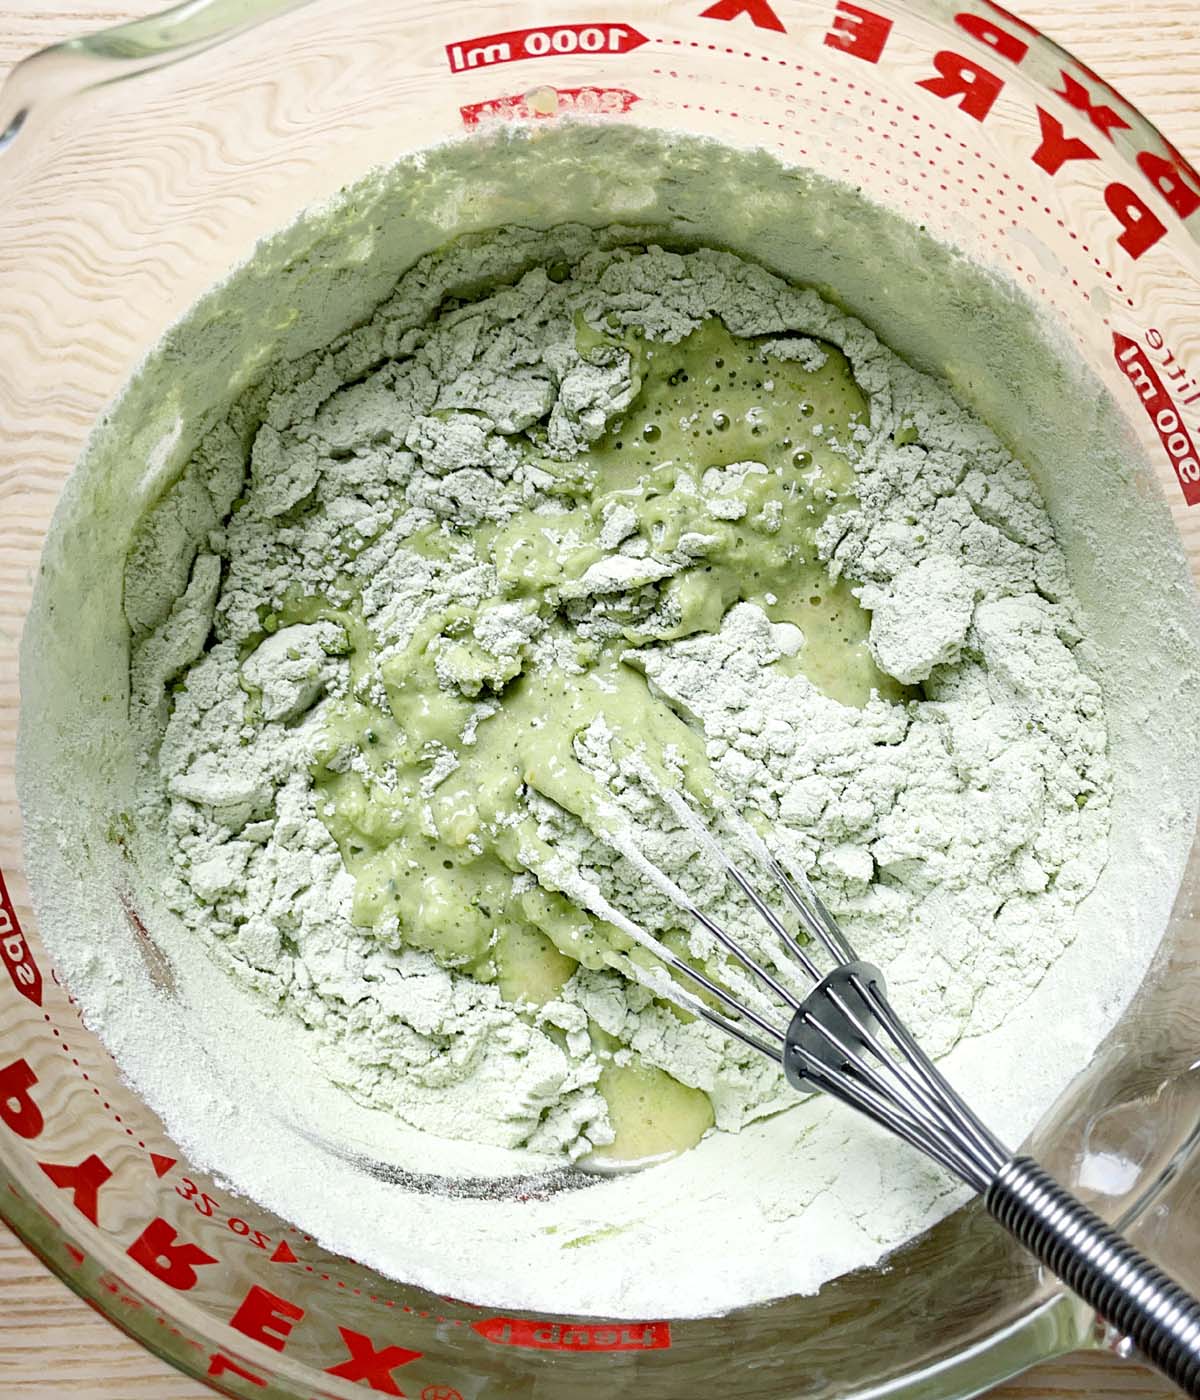 A whisk mixing white and green flour ingredients into a liquid in a glass measuring cup.